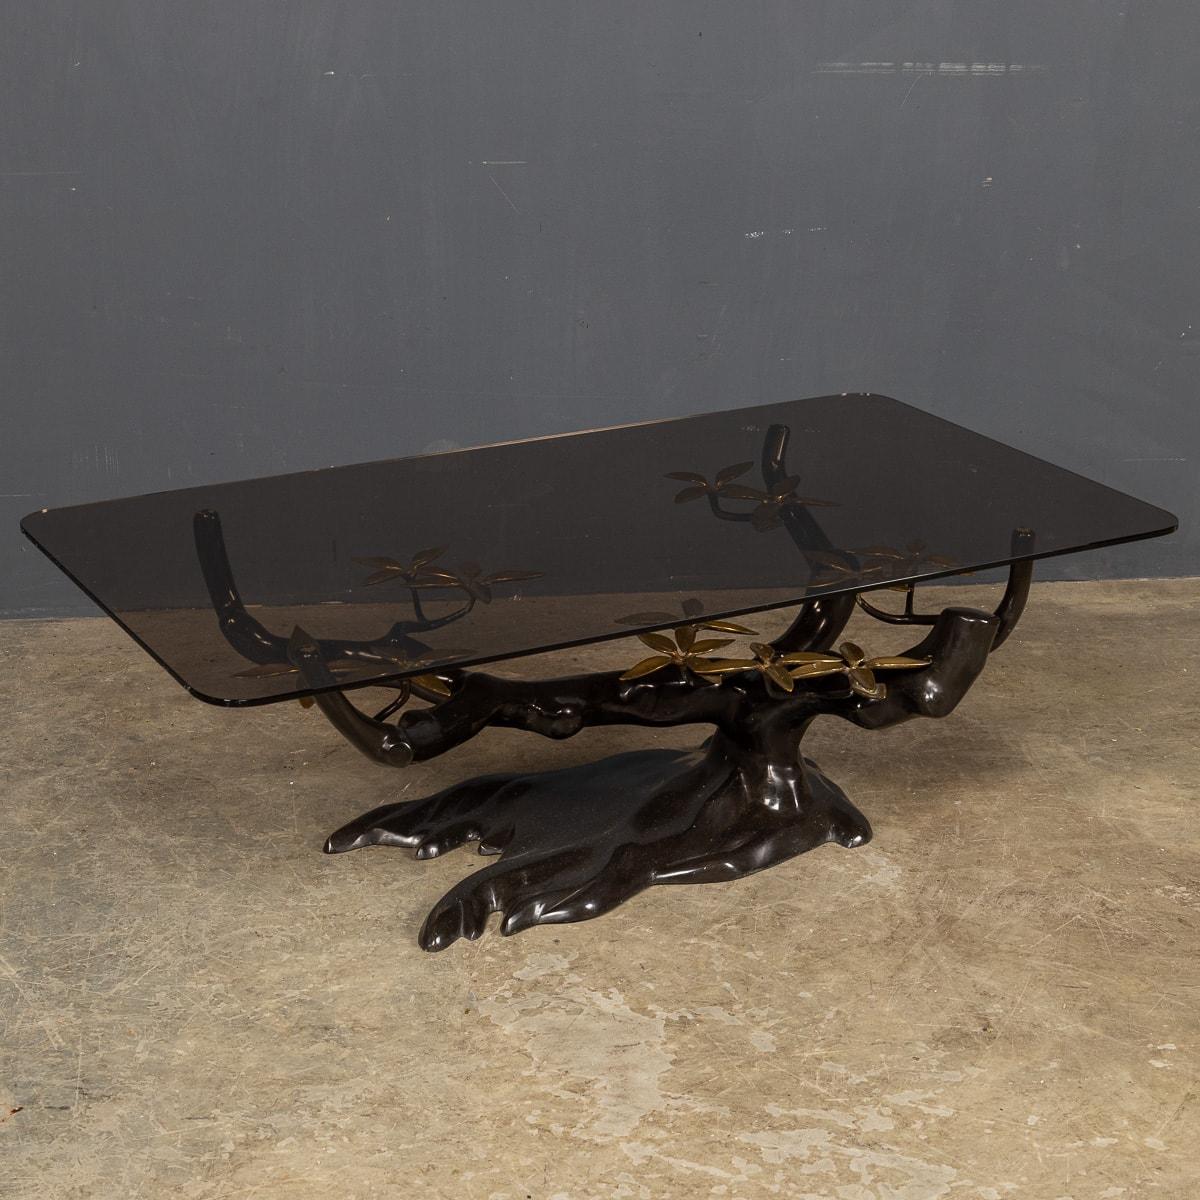 A most unusual mid 20th Century Belgian large smoked glass topped coffee table with a bonsai tree base in black metal with gilt flowers, This iconic coffee table is a real conversation piece. This iconic design is attributed to Willy Daro.